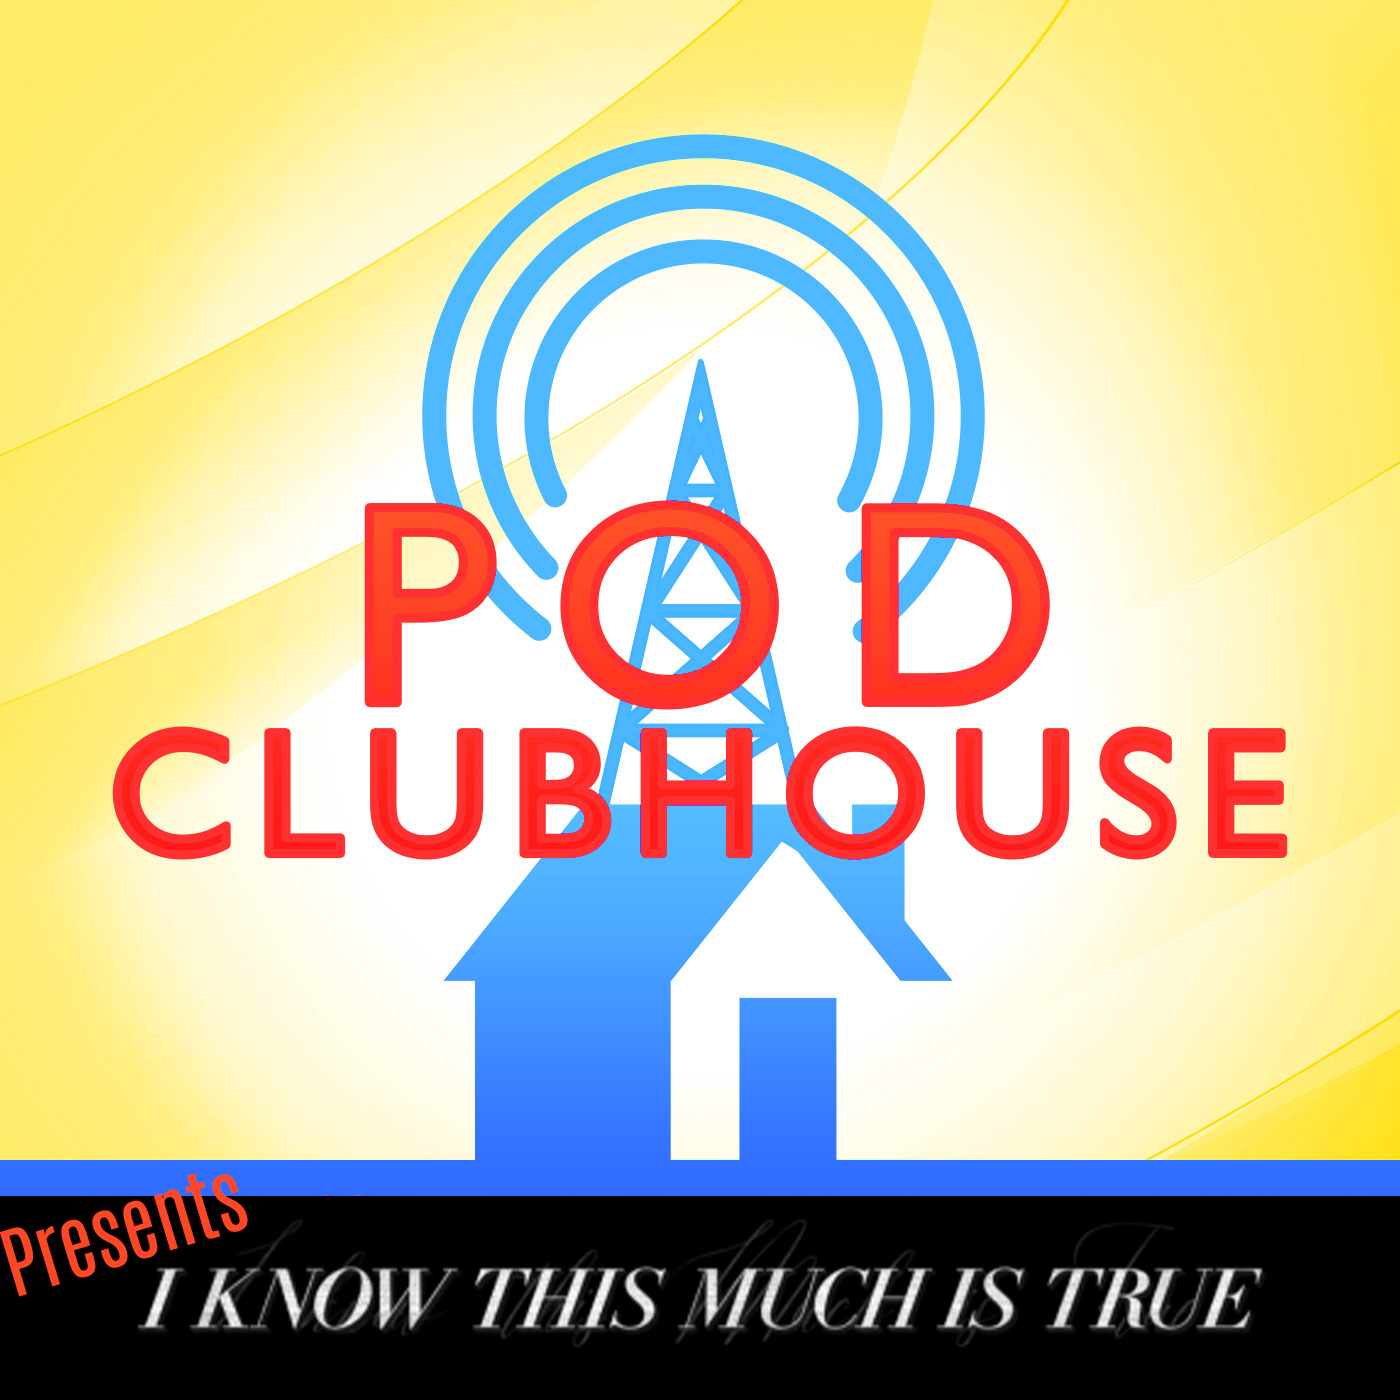 The I Know This Much is True Podcast - by Pod Clubhouse